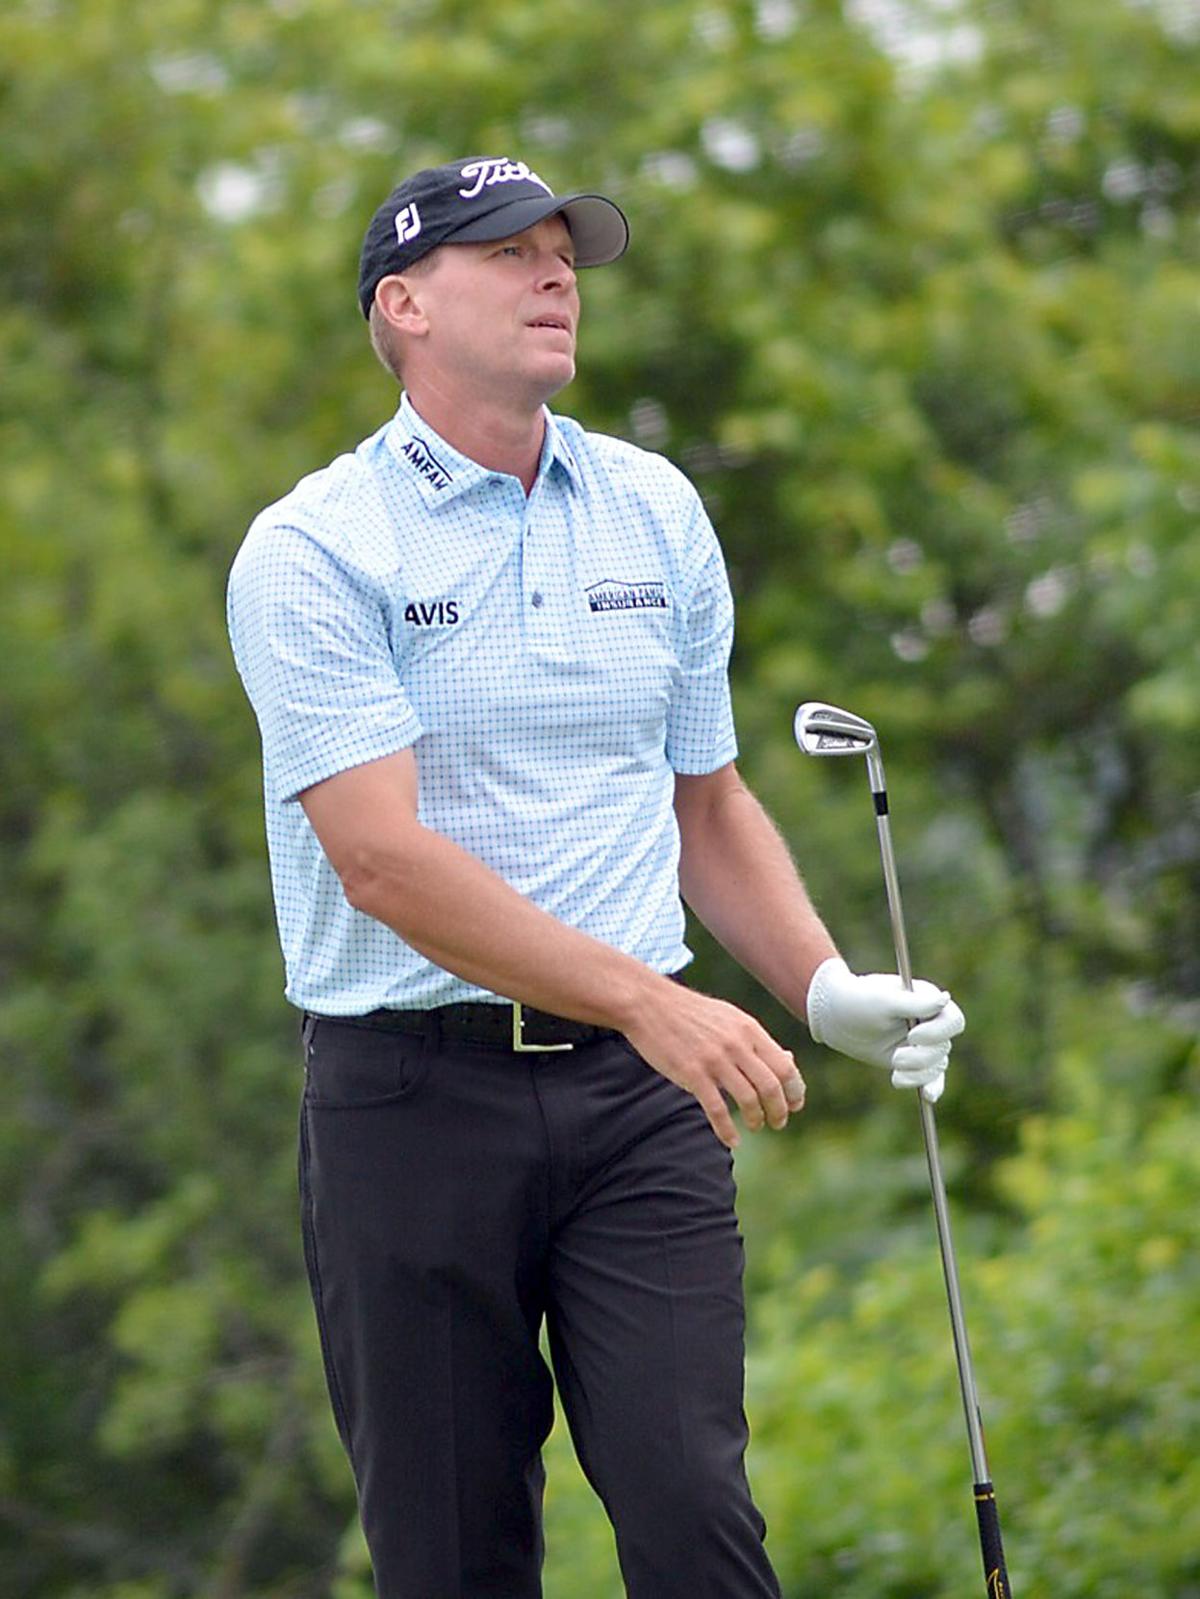 PGA Tour Playoffs are over for Steve Stricker, Jerry Kelly, but the